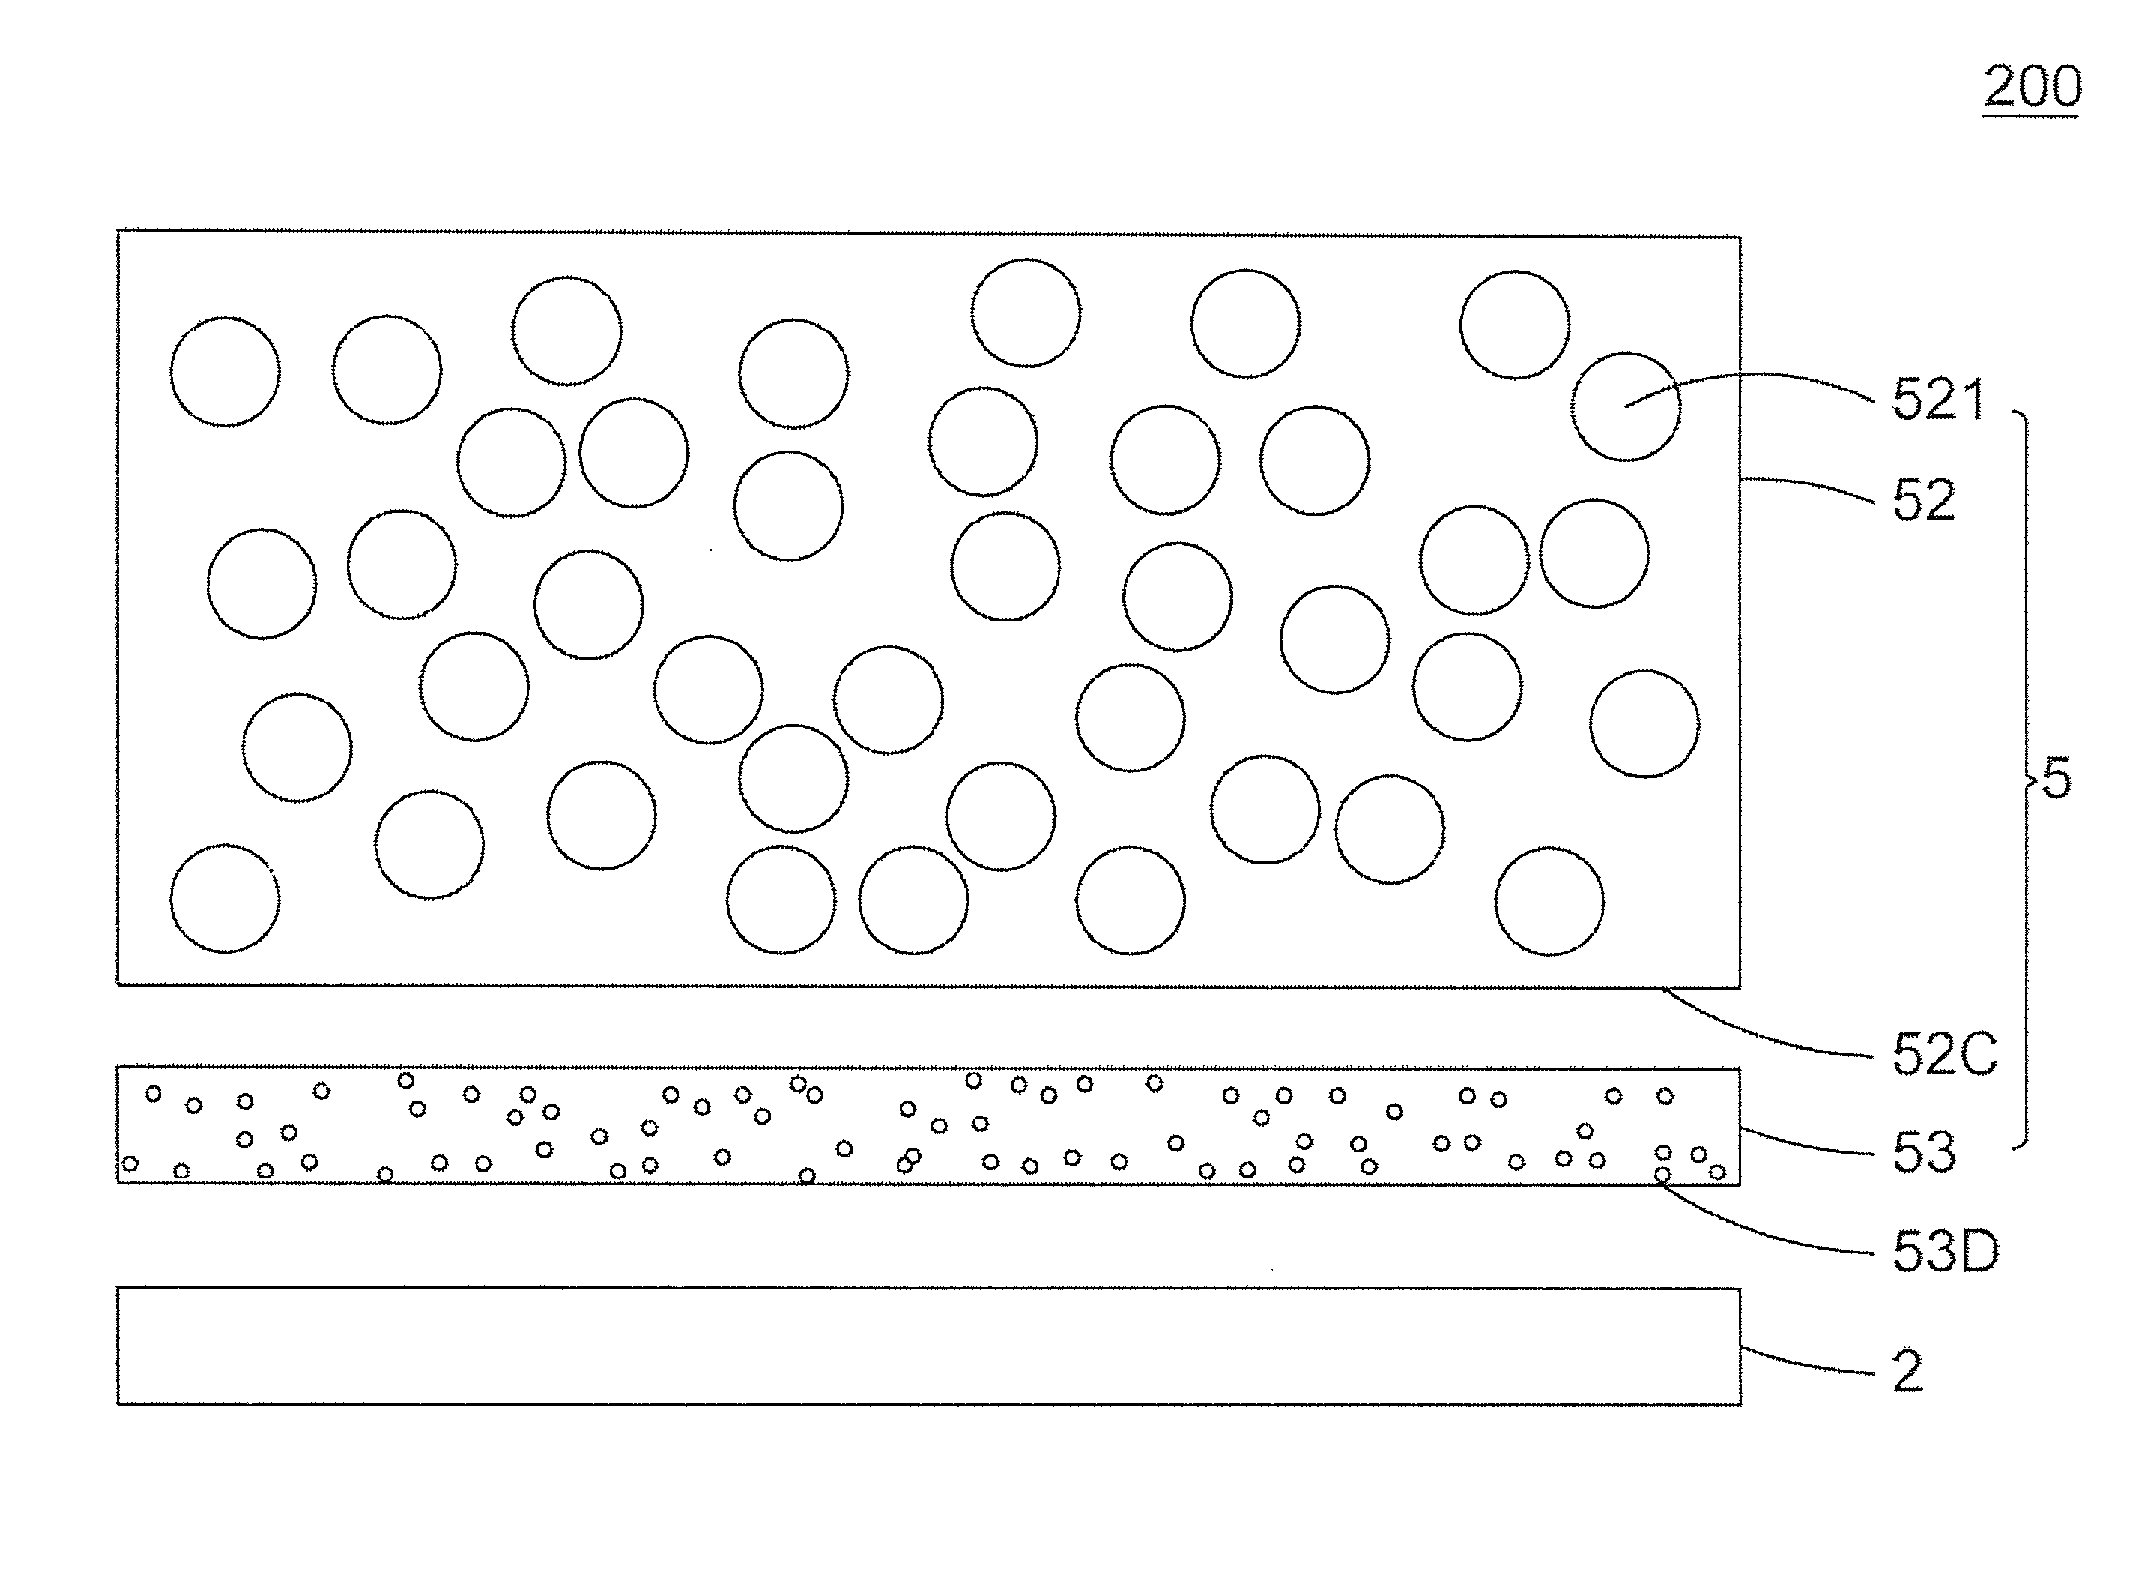 Polymeric electret film and method of manufacturing the same